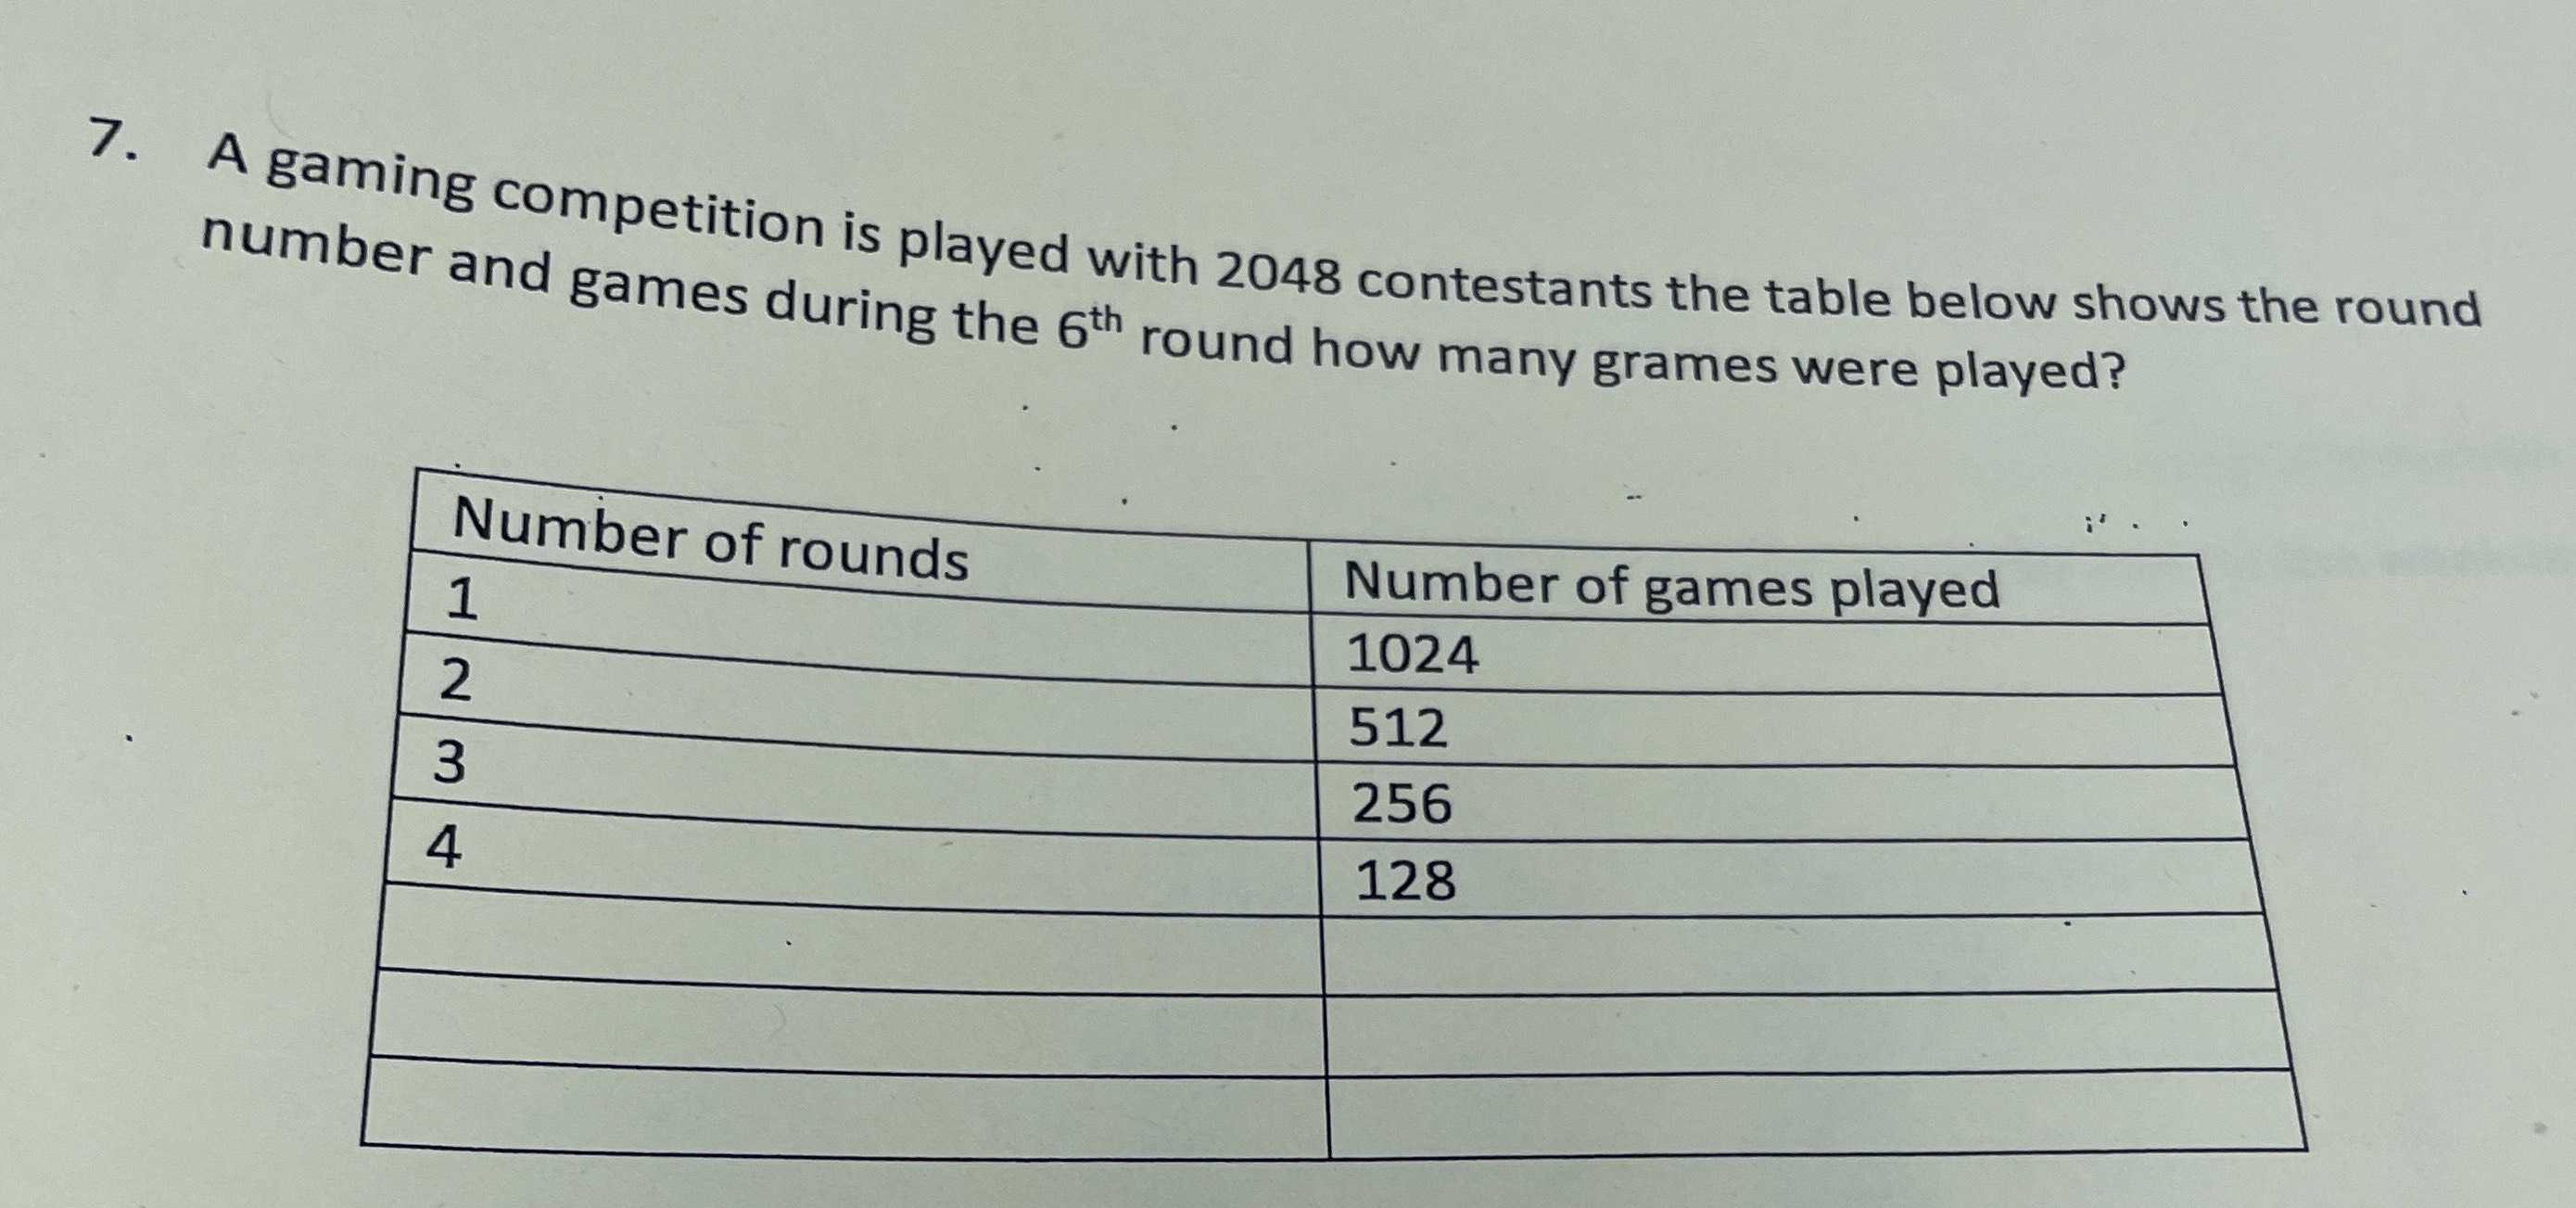 A gaming competition is played with 2048 contestan...